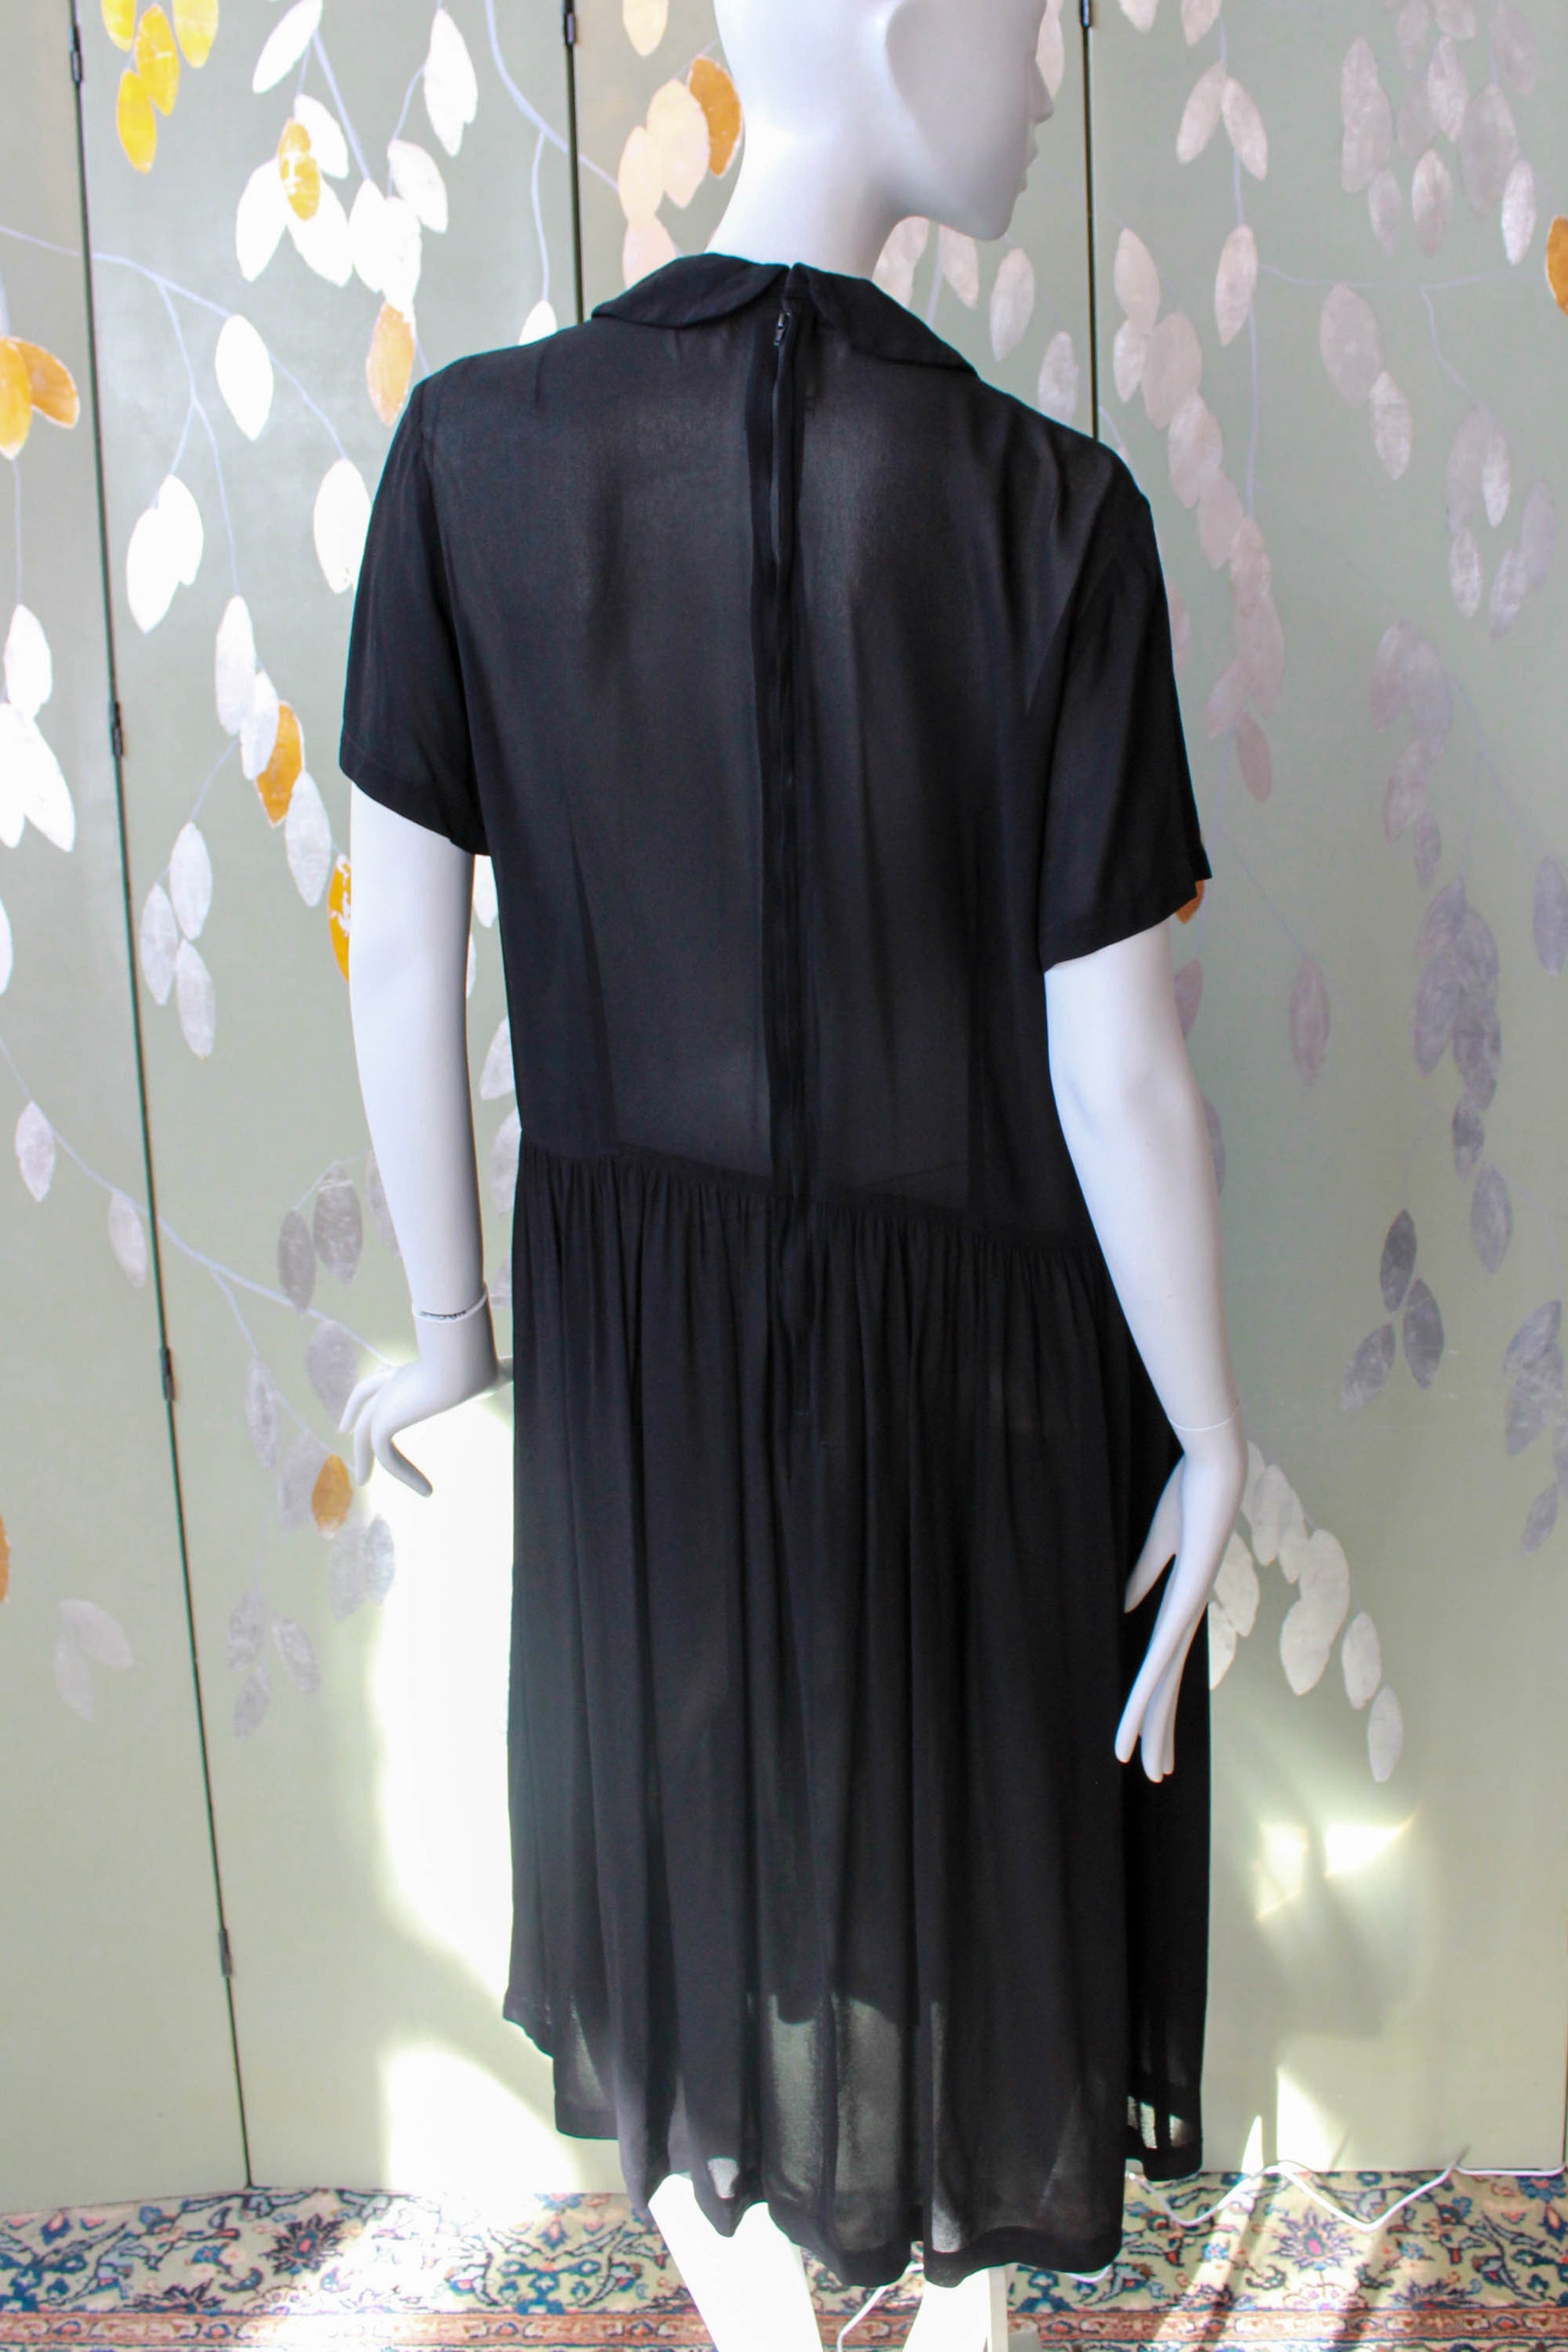 comme des garcons sheer black dress with peterpan collar, gathered skirt, short sleeves, pleated know detail on front, midi length